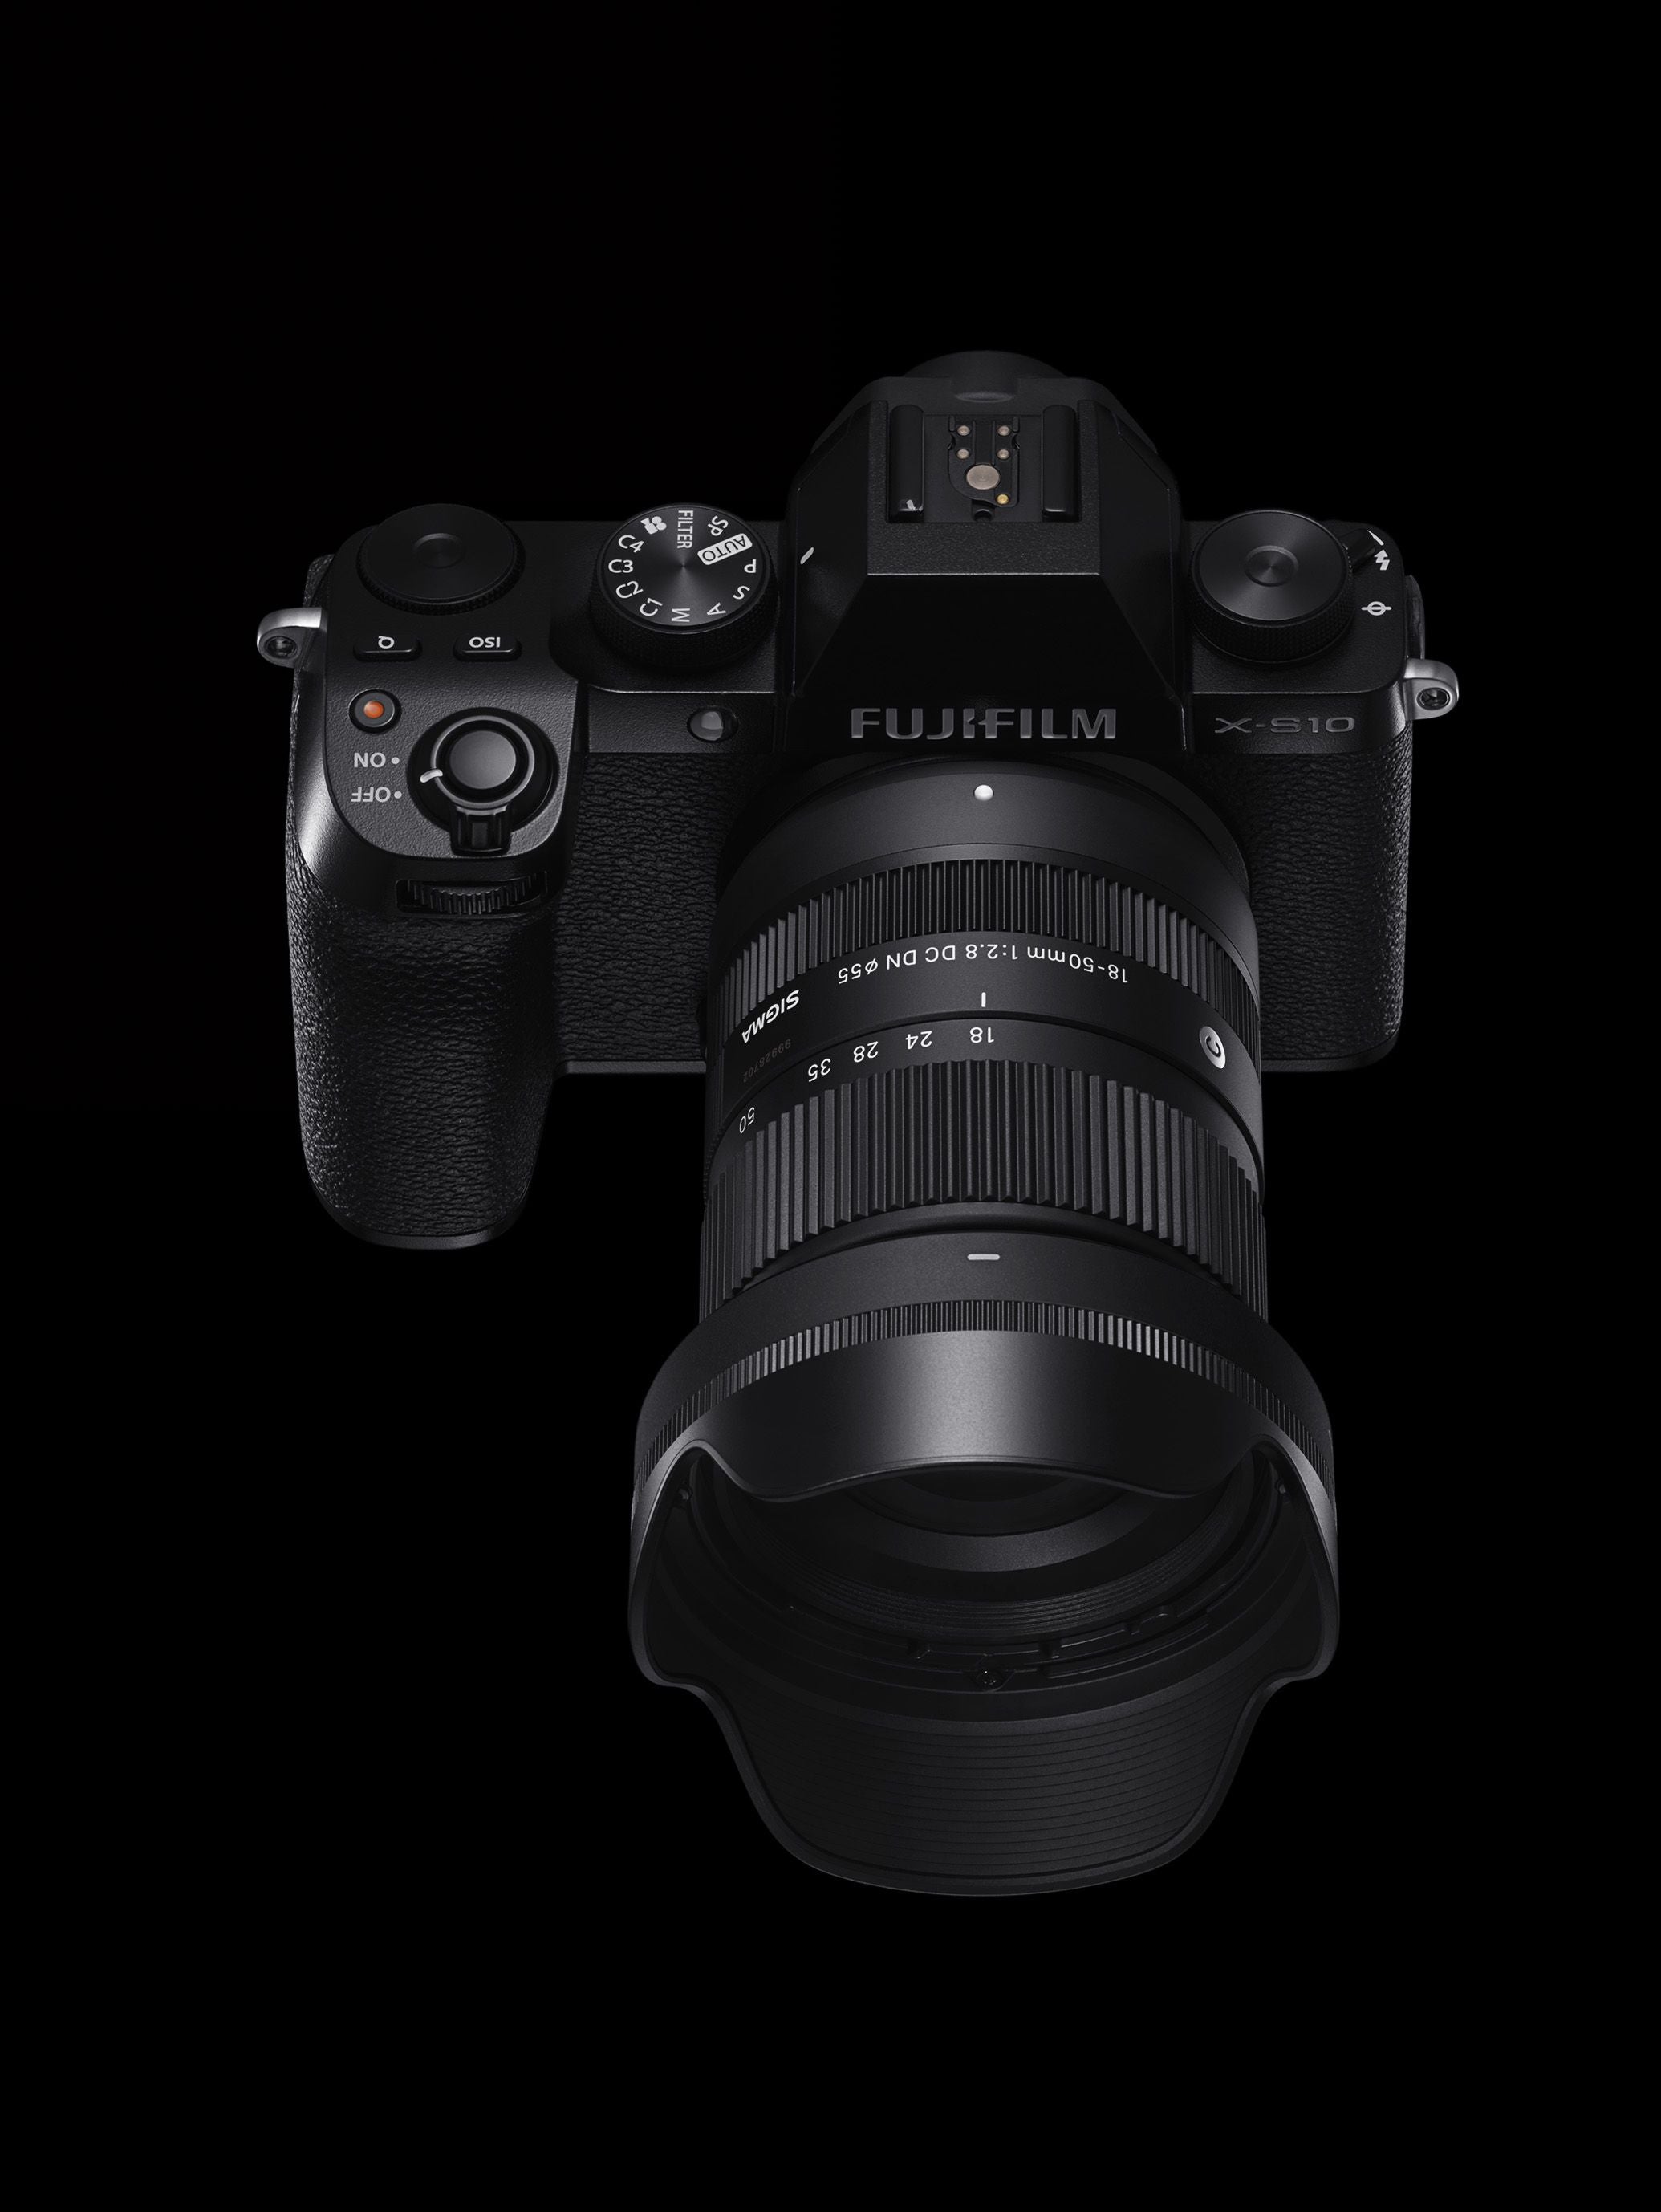 SIGMA launches its first zoom lens for FUJIFILM X Mount – the 18-50mm F2.8 DC DN | Contemporary Lens